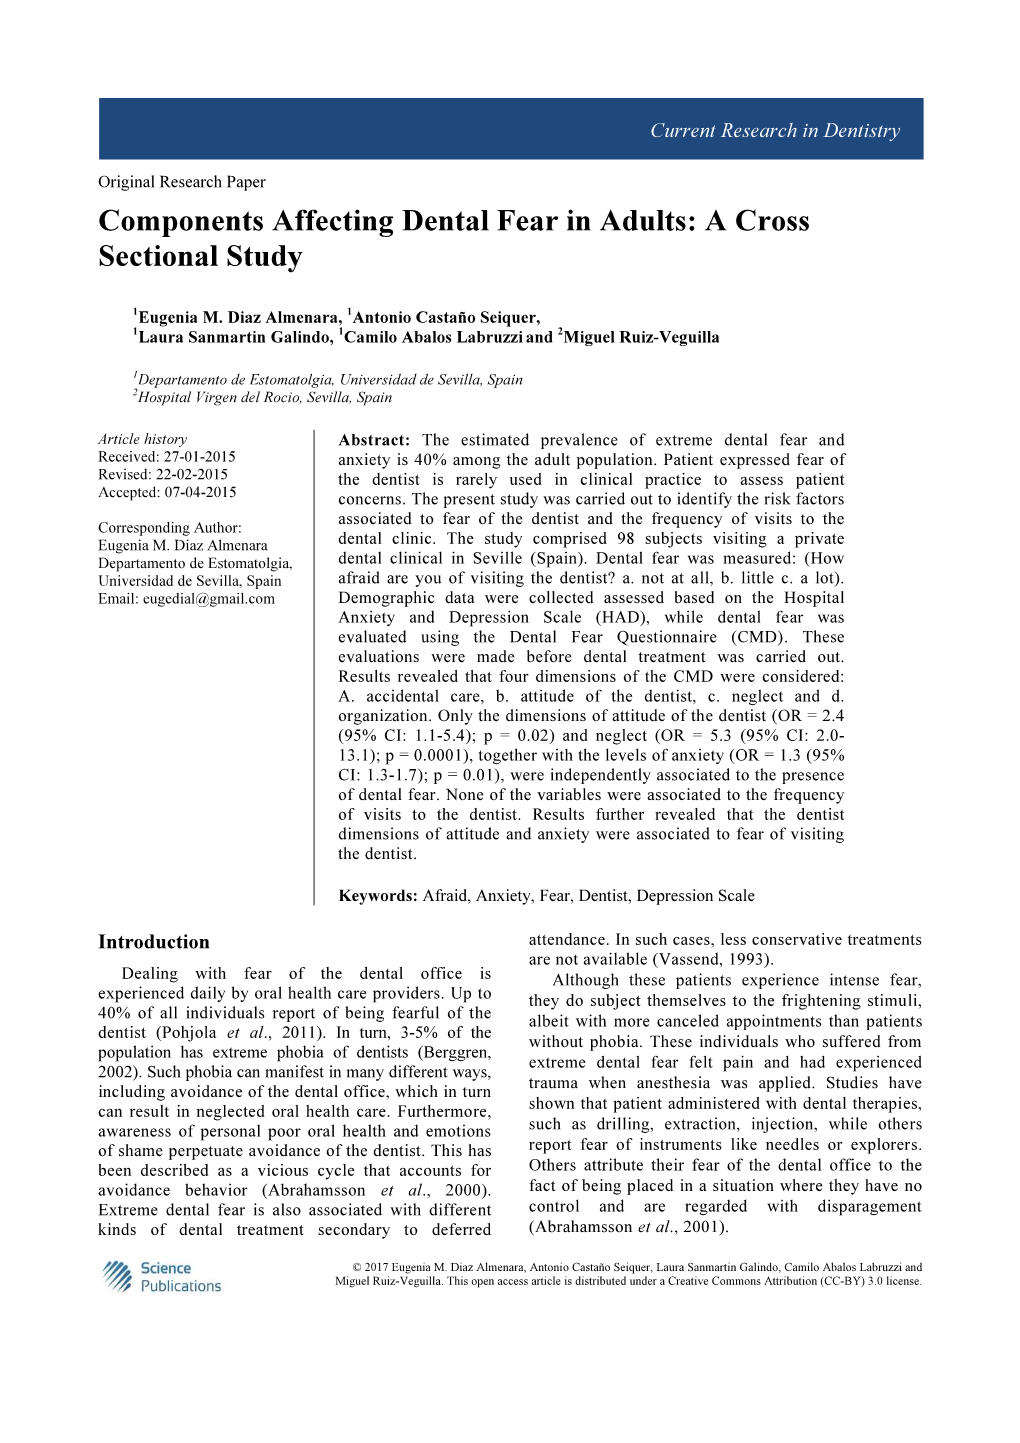 Components Affecting Dental Fear in Adults: a Cross Sectional Study